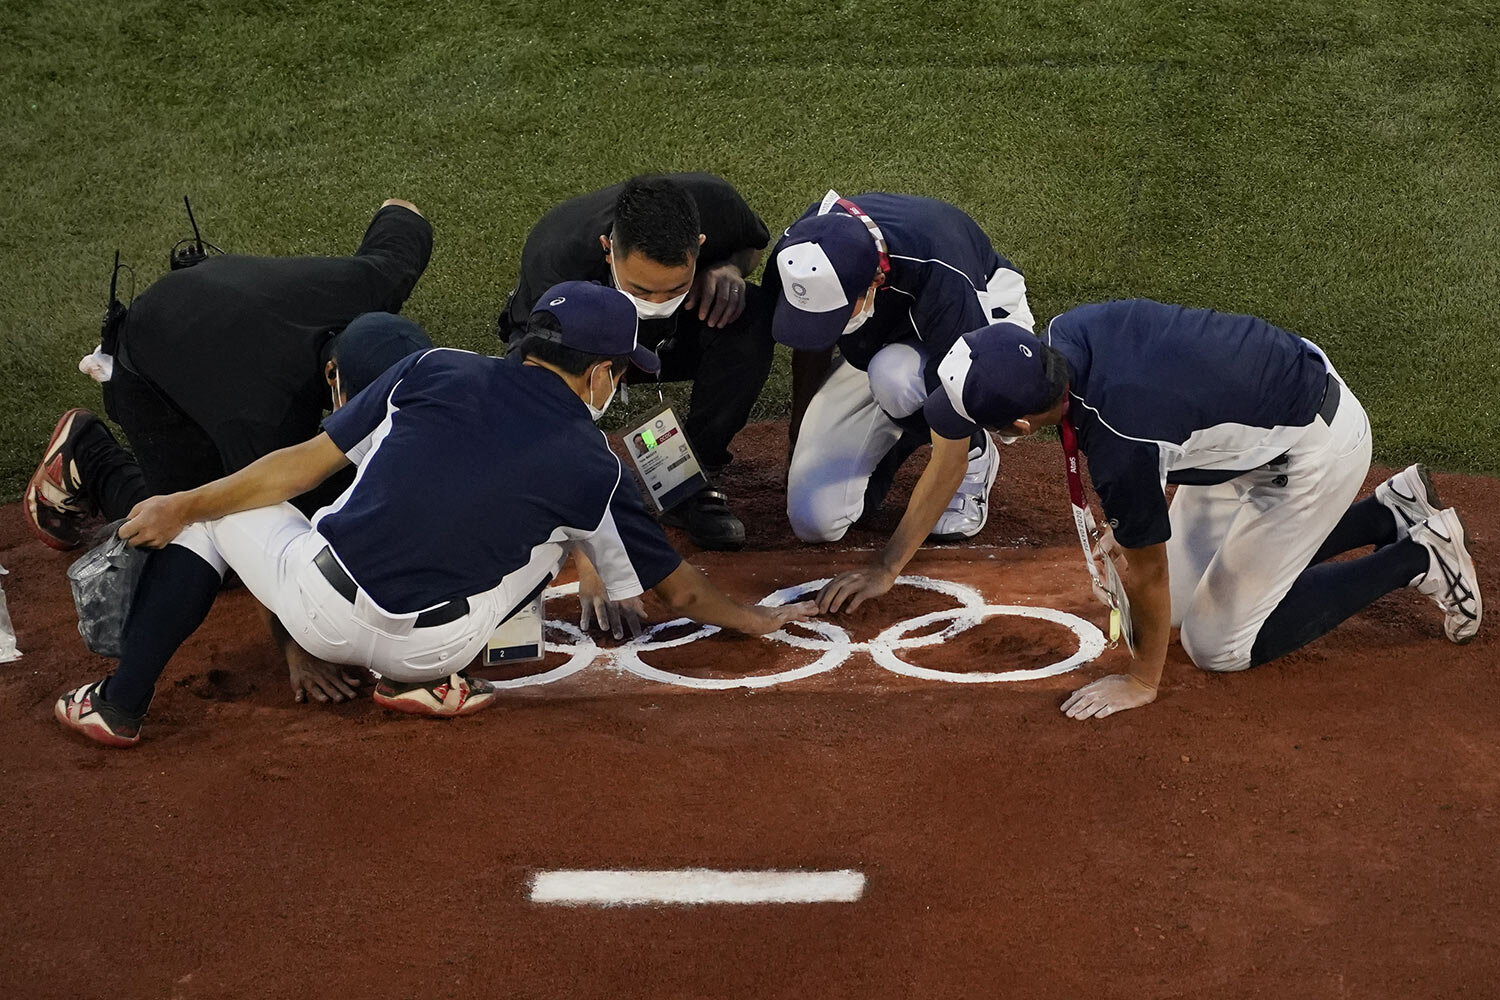  Workers place the Olympic Rings on the pitching mound ahead of a baseball game between The Dominican Republic and South Korea at the 2020 Summer Olympics, Sunday, Aug. 1, 2021, in Yokohama, Japan. (AP Photo/Sue Ogrocki) 